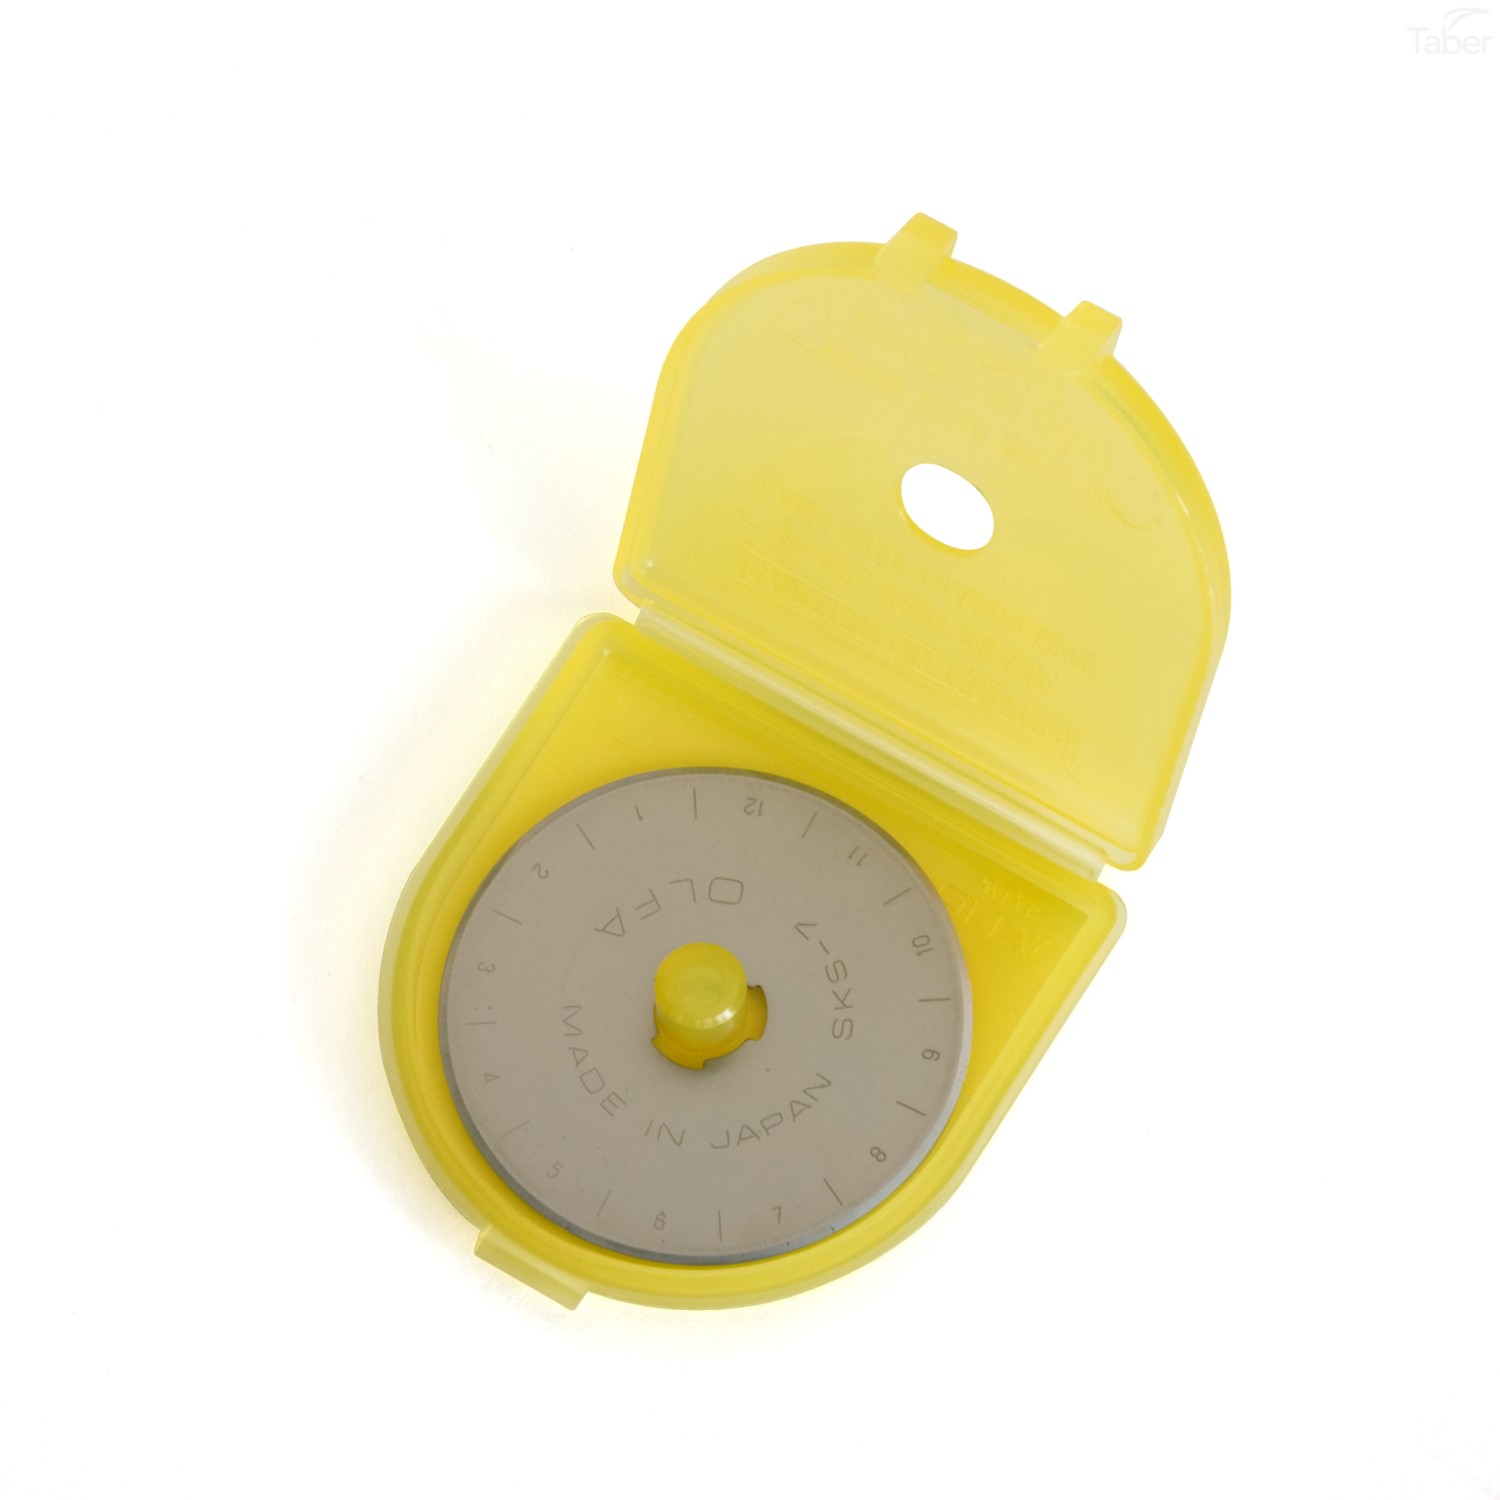 Olfa RB 45 Rotary Cutter Blades (5 pack)